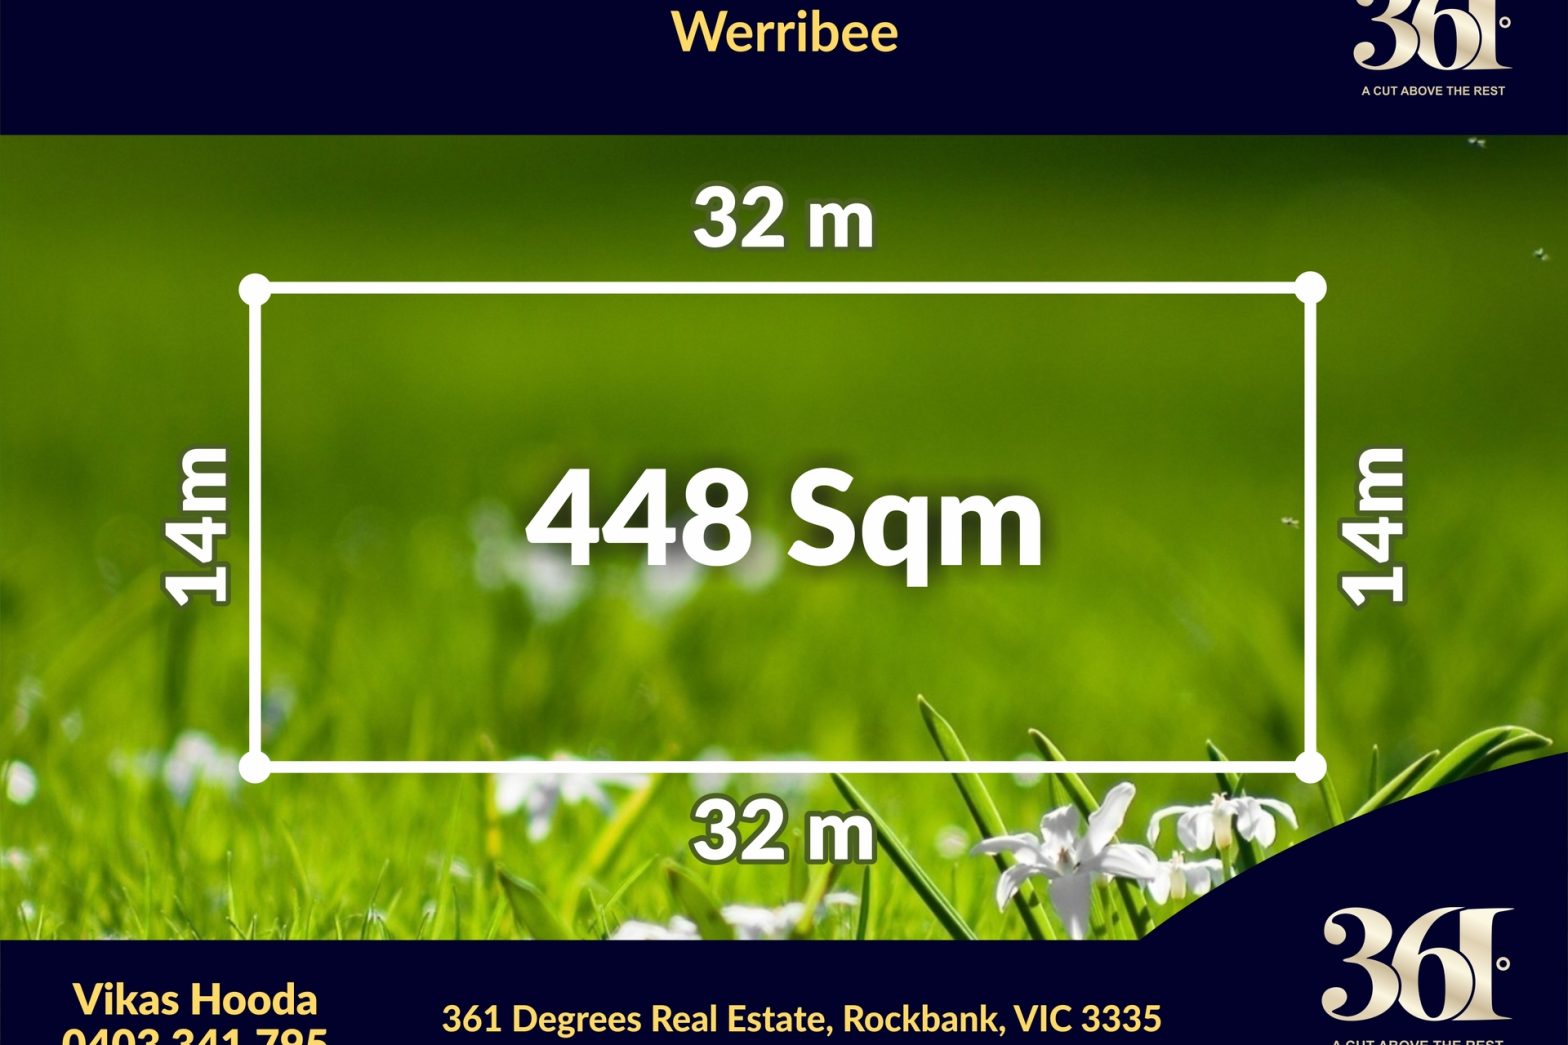 448 Sqm Block of Land for Sale in Werribee!!!